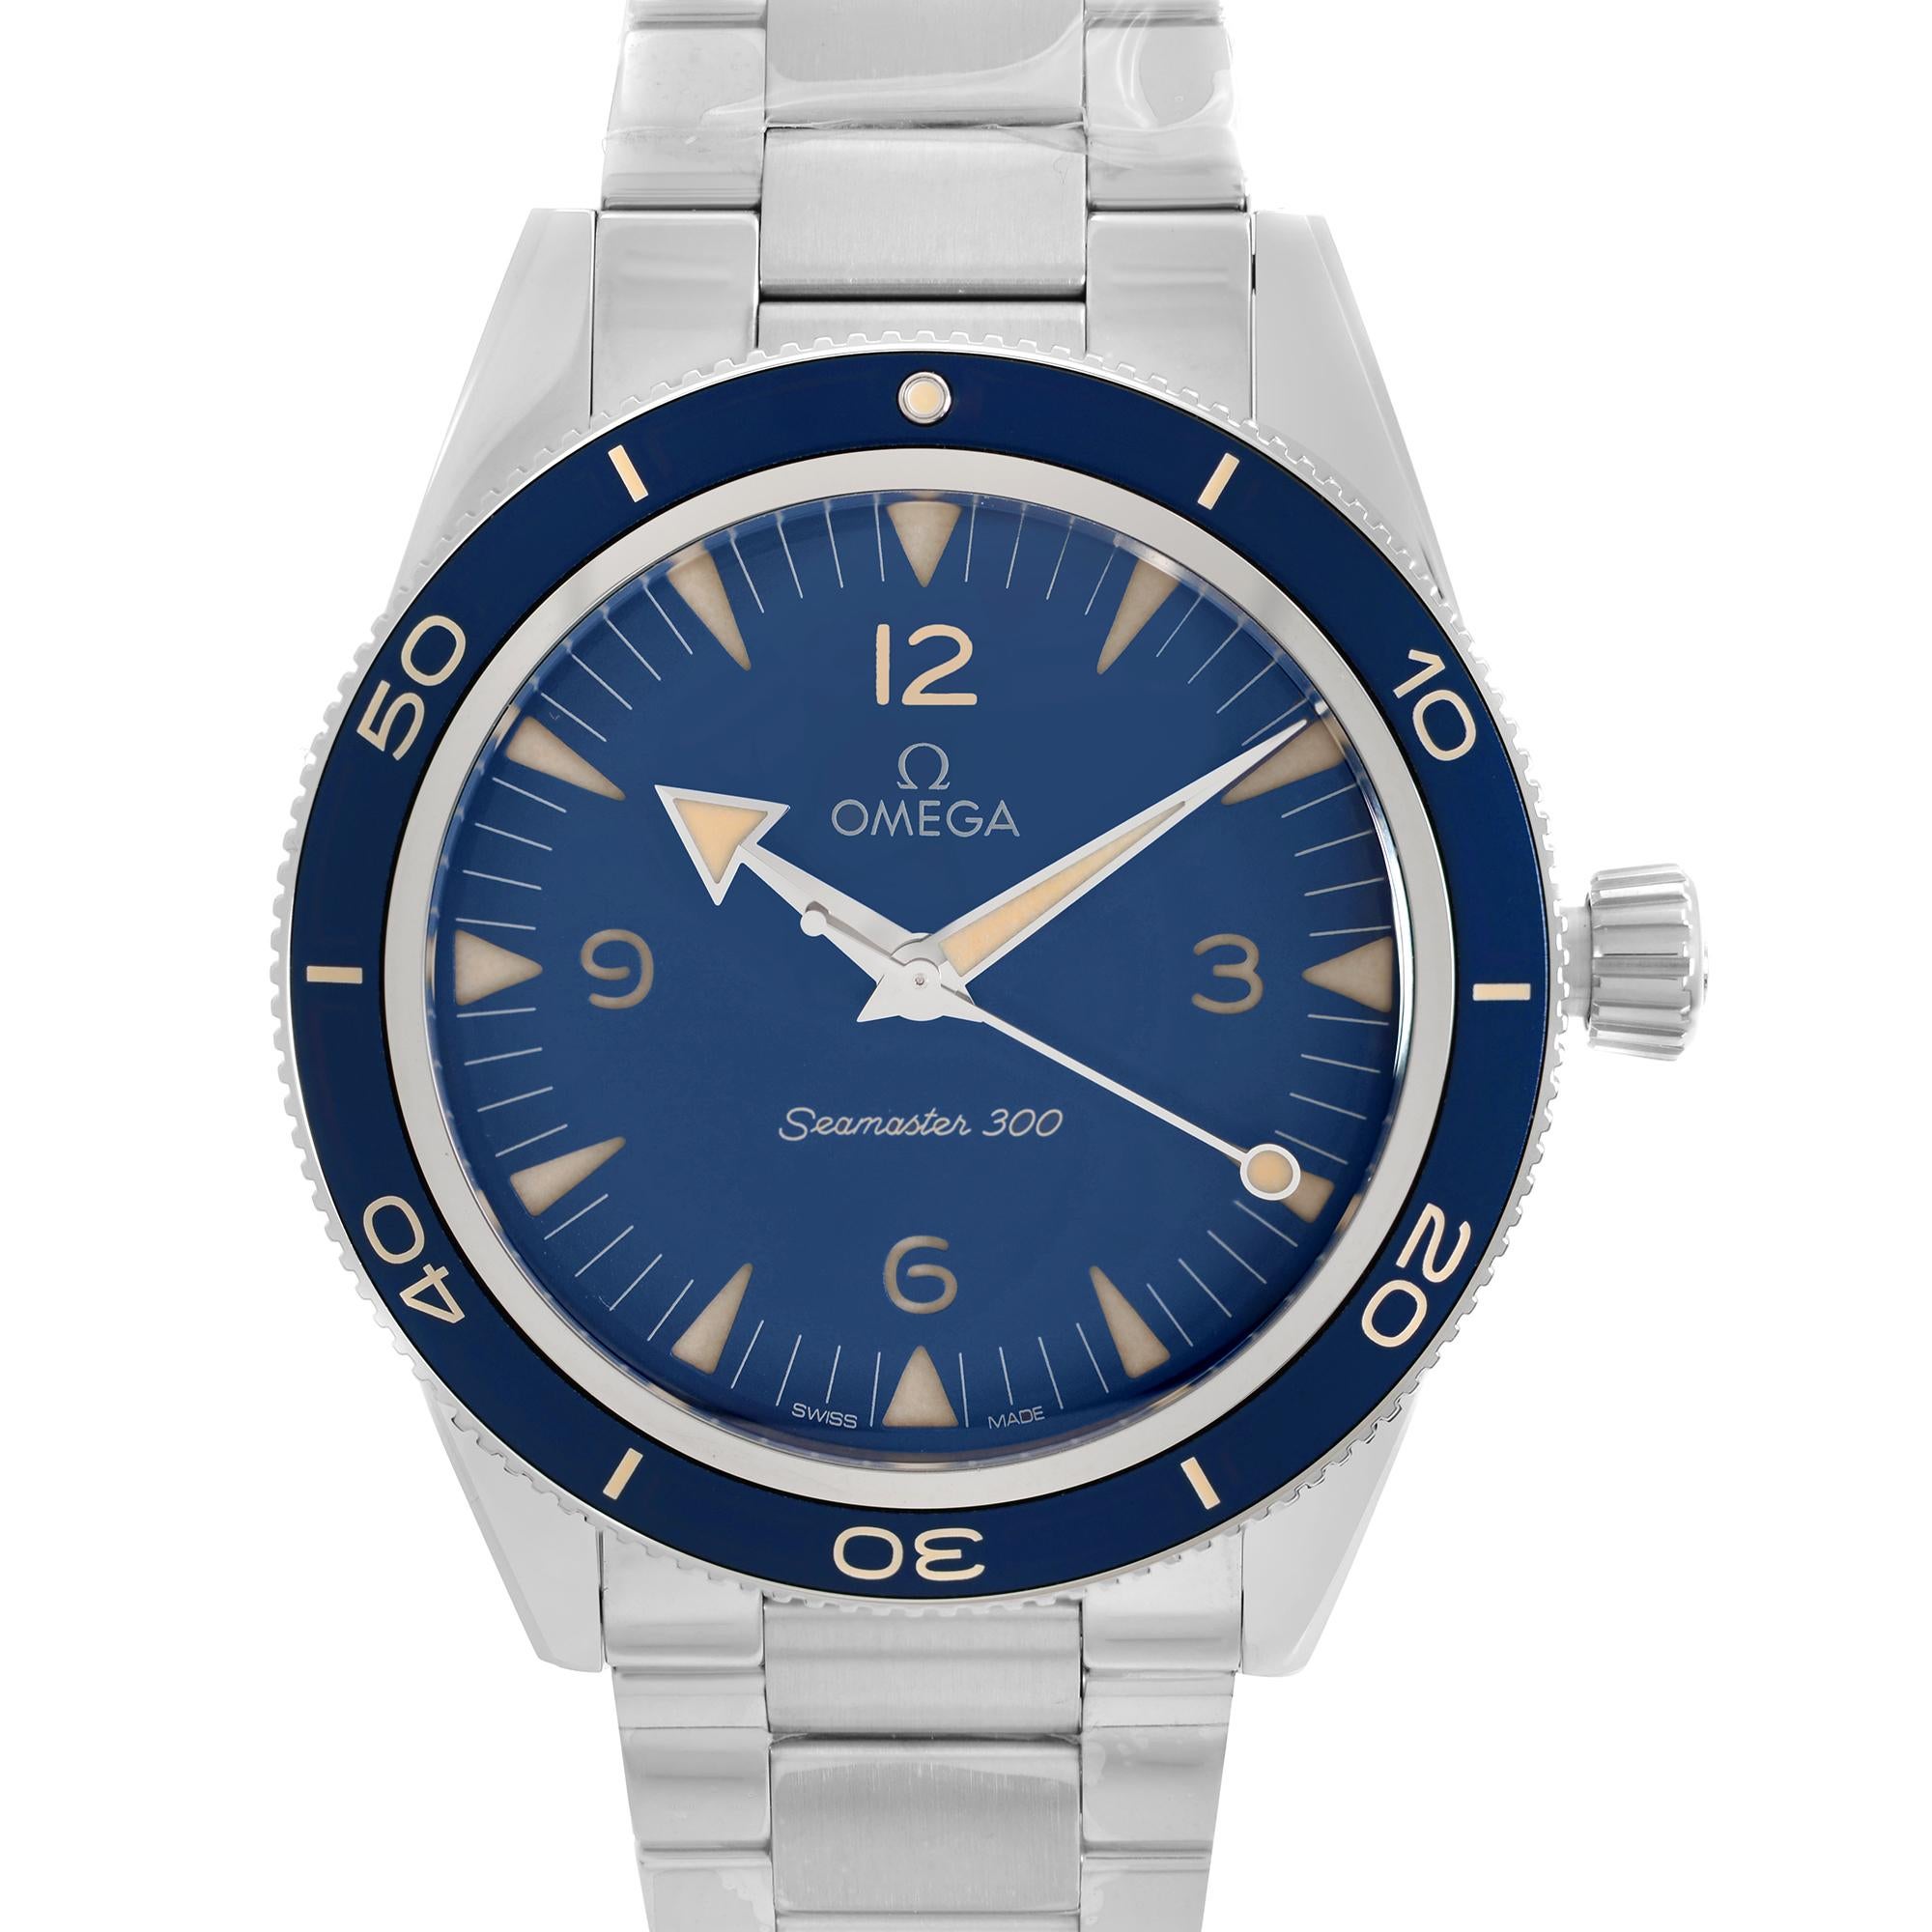 Unworn Omega Seamaster 300 Co-Axial Master Chronometer Blue Dial 234.30.41.21.03.001. This Beautiful Timepiece is Powered by Mechanical (Automatic) Movement And Features: Round Stainless Steel Case with a Stainless Steel Bracelet, Unidirectional